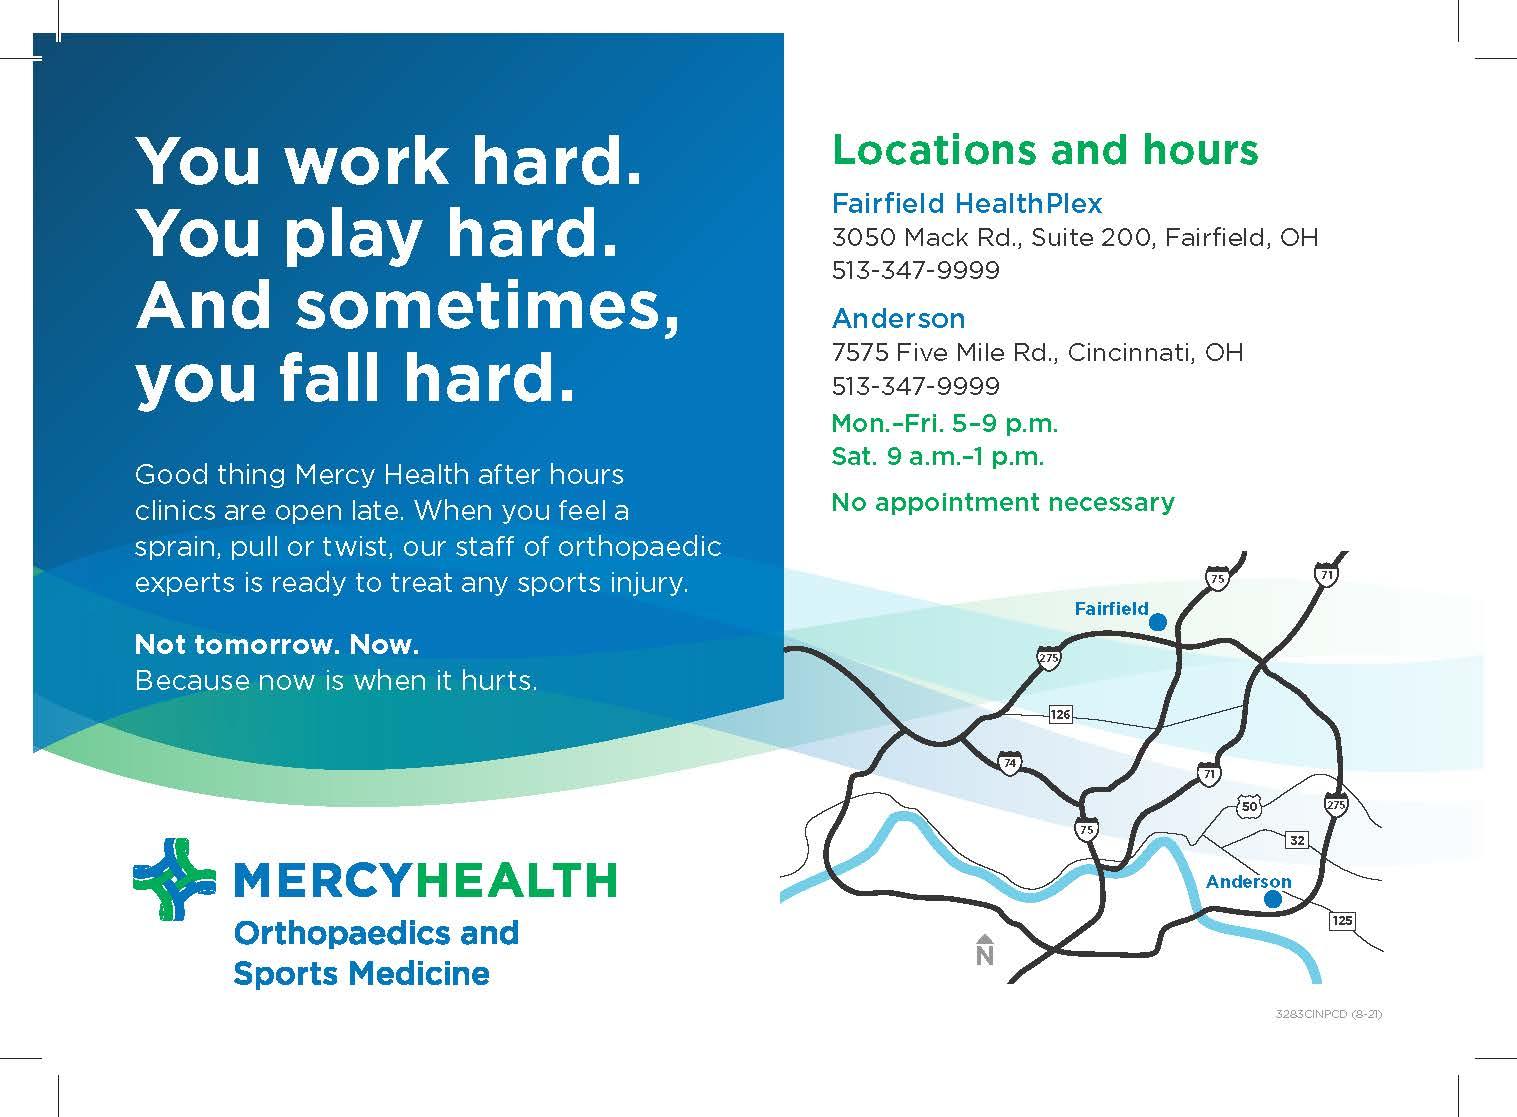 This is the flyer for Mercy Health's new orthopedic and sports medicine after hours clinic. 